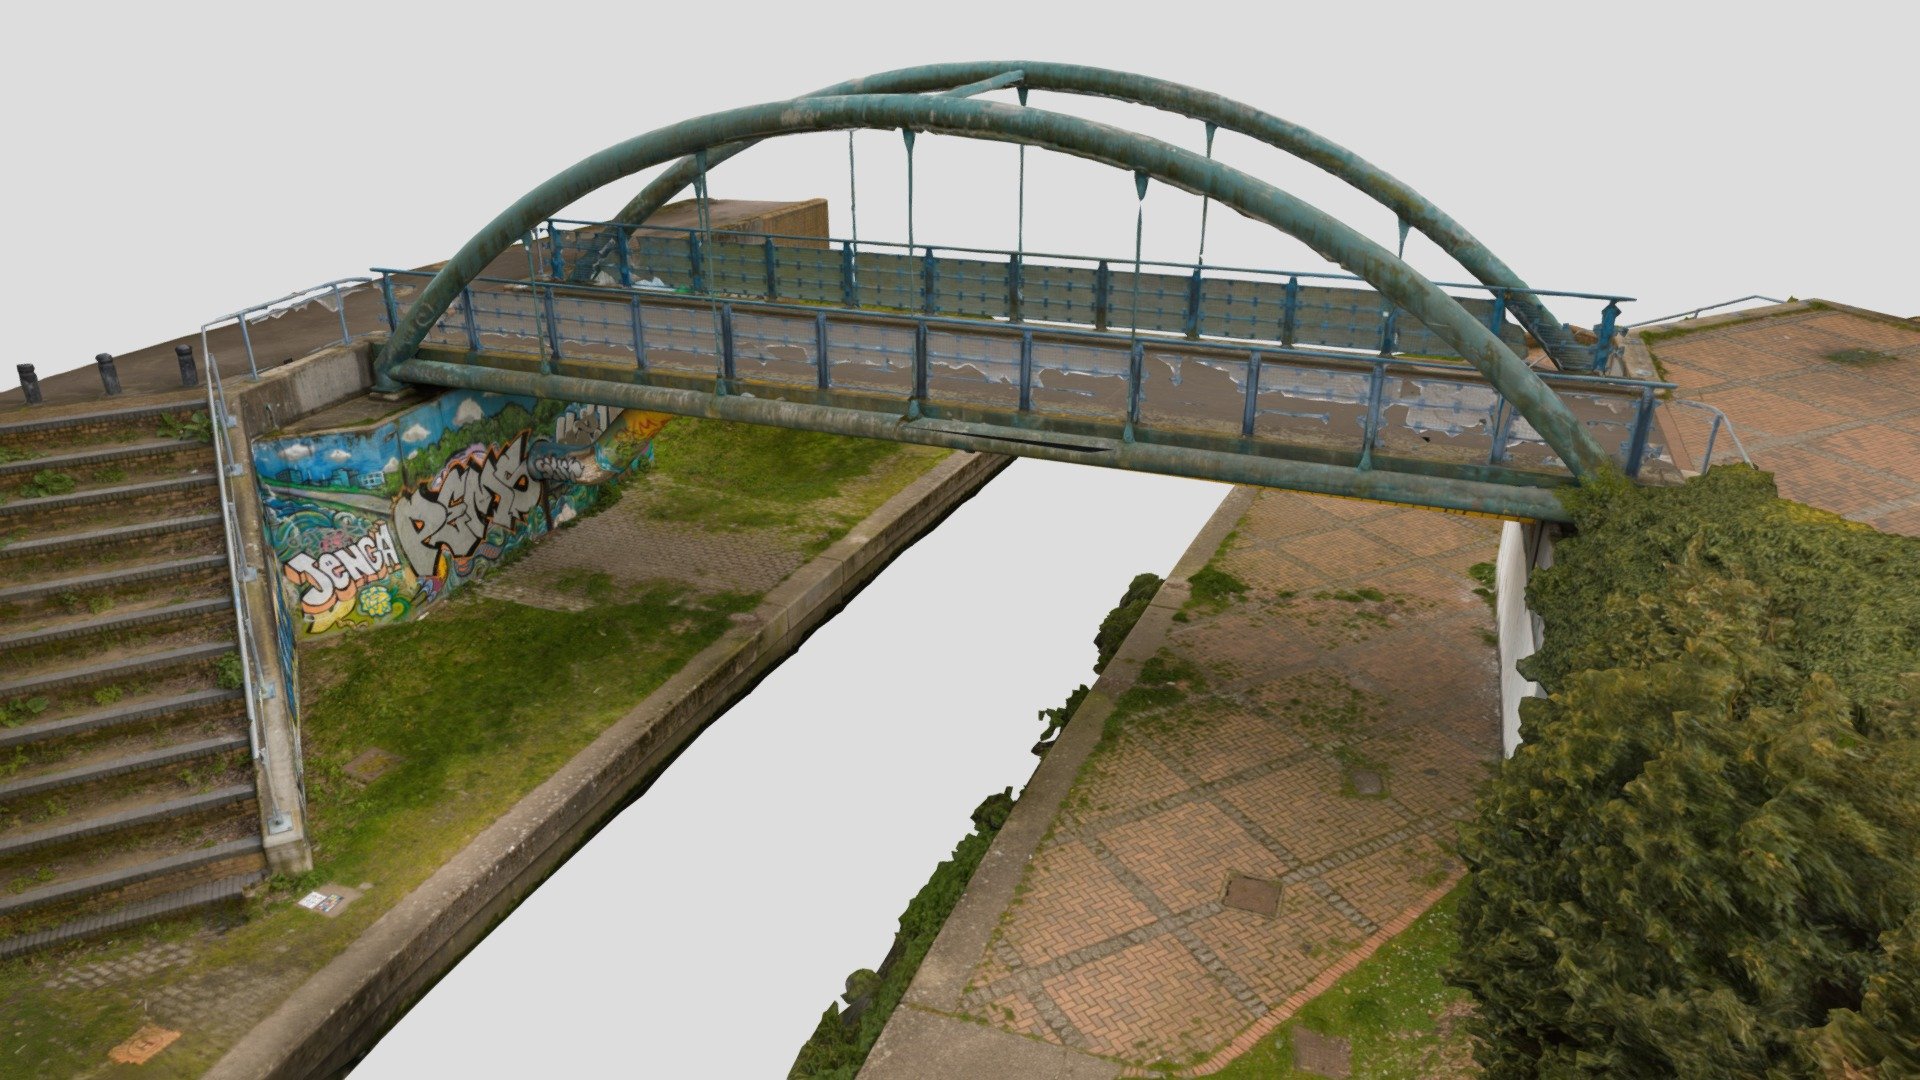 High Quality Photogrammetry Model of a Footbridge on the River Pool

To ensure colour accuracy the Raw Photography was profiled with X-Rite ColorChecker and a unique profile created for sRGB Colour Gamut in Lightroom. 
Lods have been cleaned up to remove floating polygons and close holes (where possible). Note there are 2 diffuse maps with the package. The first diffuse map texture is the original photography, the second map is called diffuse_3 and are delit for re-lighting so you have both options available to you!

Render of the 1 million poly mesh from Blender (scene not included).

https://youtu.be/a3SQhpfBbRA

Package includes 4 LODs with 




1 million Polygon FBX model with 8k x10 UDIM Diffuse, Diffuse_3 Texture Maps and Normal Maps 

500k Polygon FBX model with 8k x2 UDIM Diffuse, Diffuse_3 Texture Maps and Normal Maps

200k Polygon FBX model with 8k x2 UDIM Diffuse, Diffuse_3 Texture Maps and Normal Maps 

50k Polygon FBX model with 8k x2 UDIM Diffuse, Diffuse_3 Texture Maps and Normal Maps
 - River Pool Footbridge - Buy Royalty Free 3D model by Kieron Helsdon (@ronski) 3d model